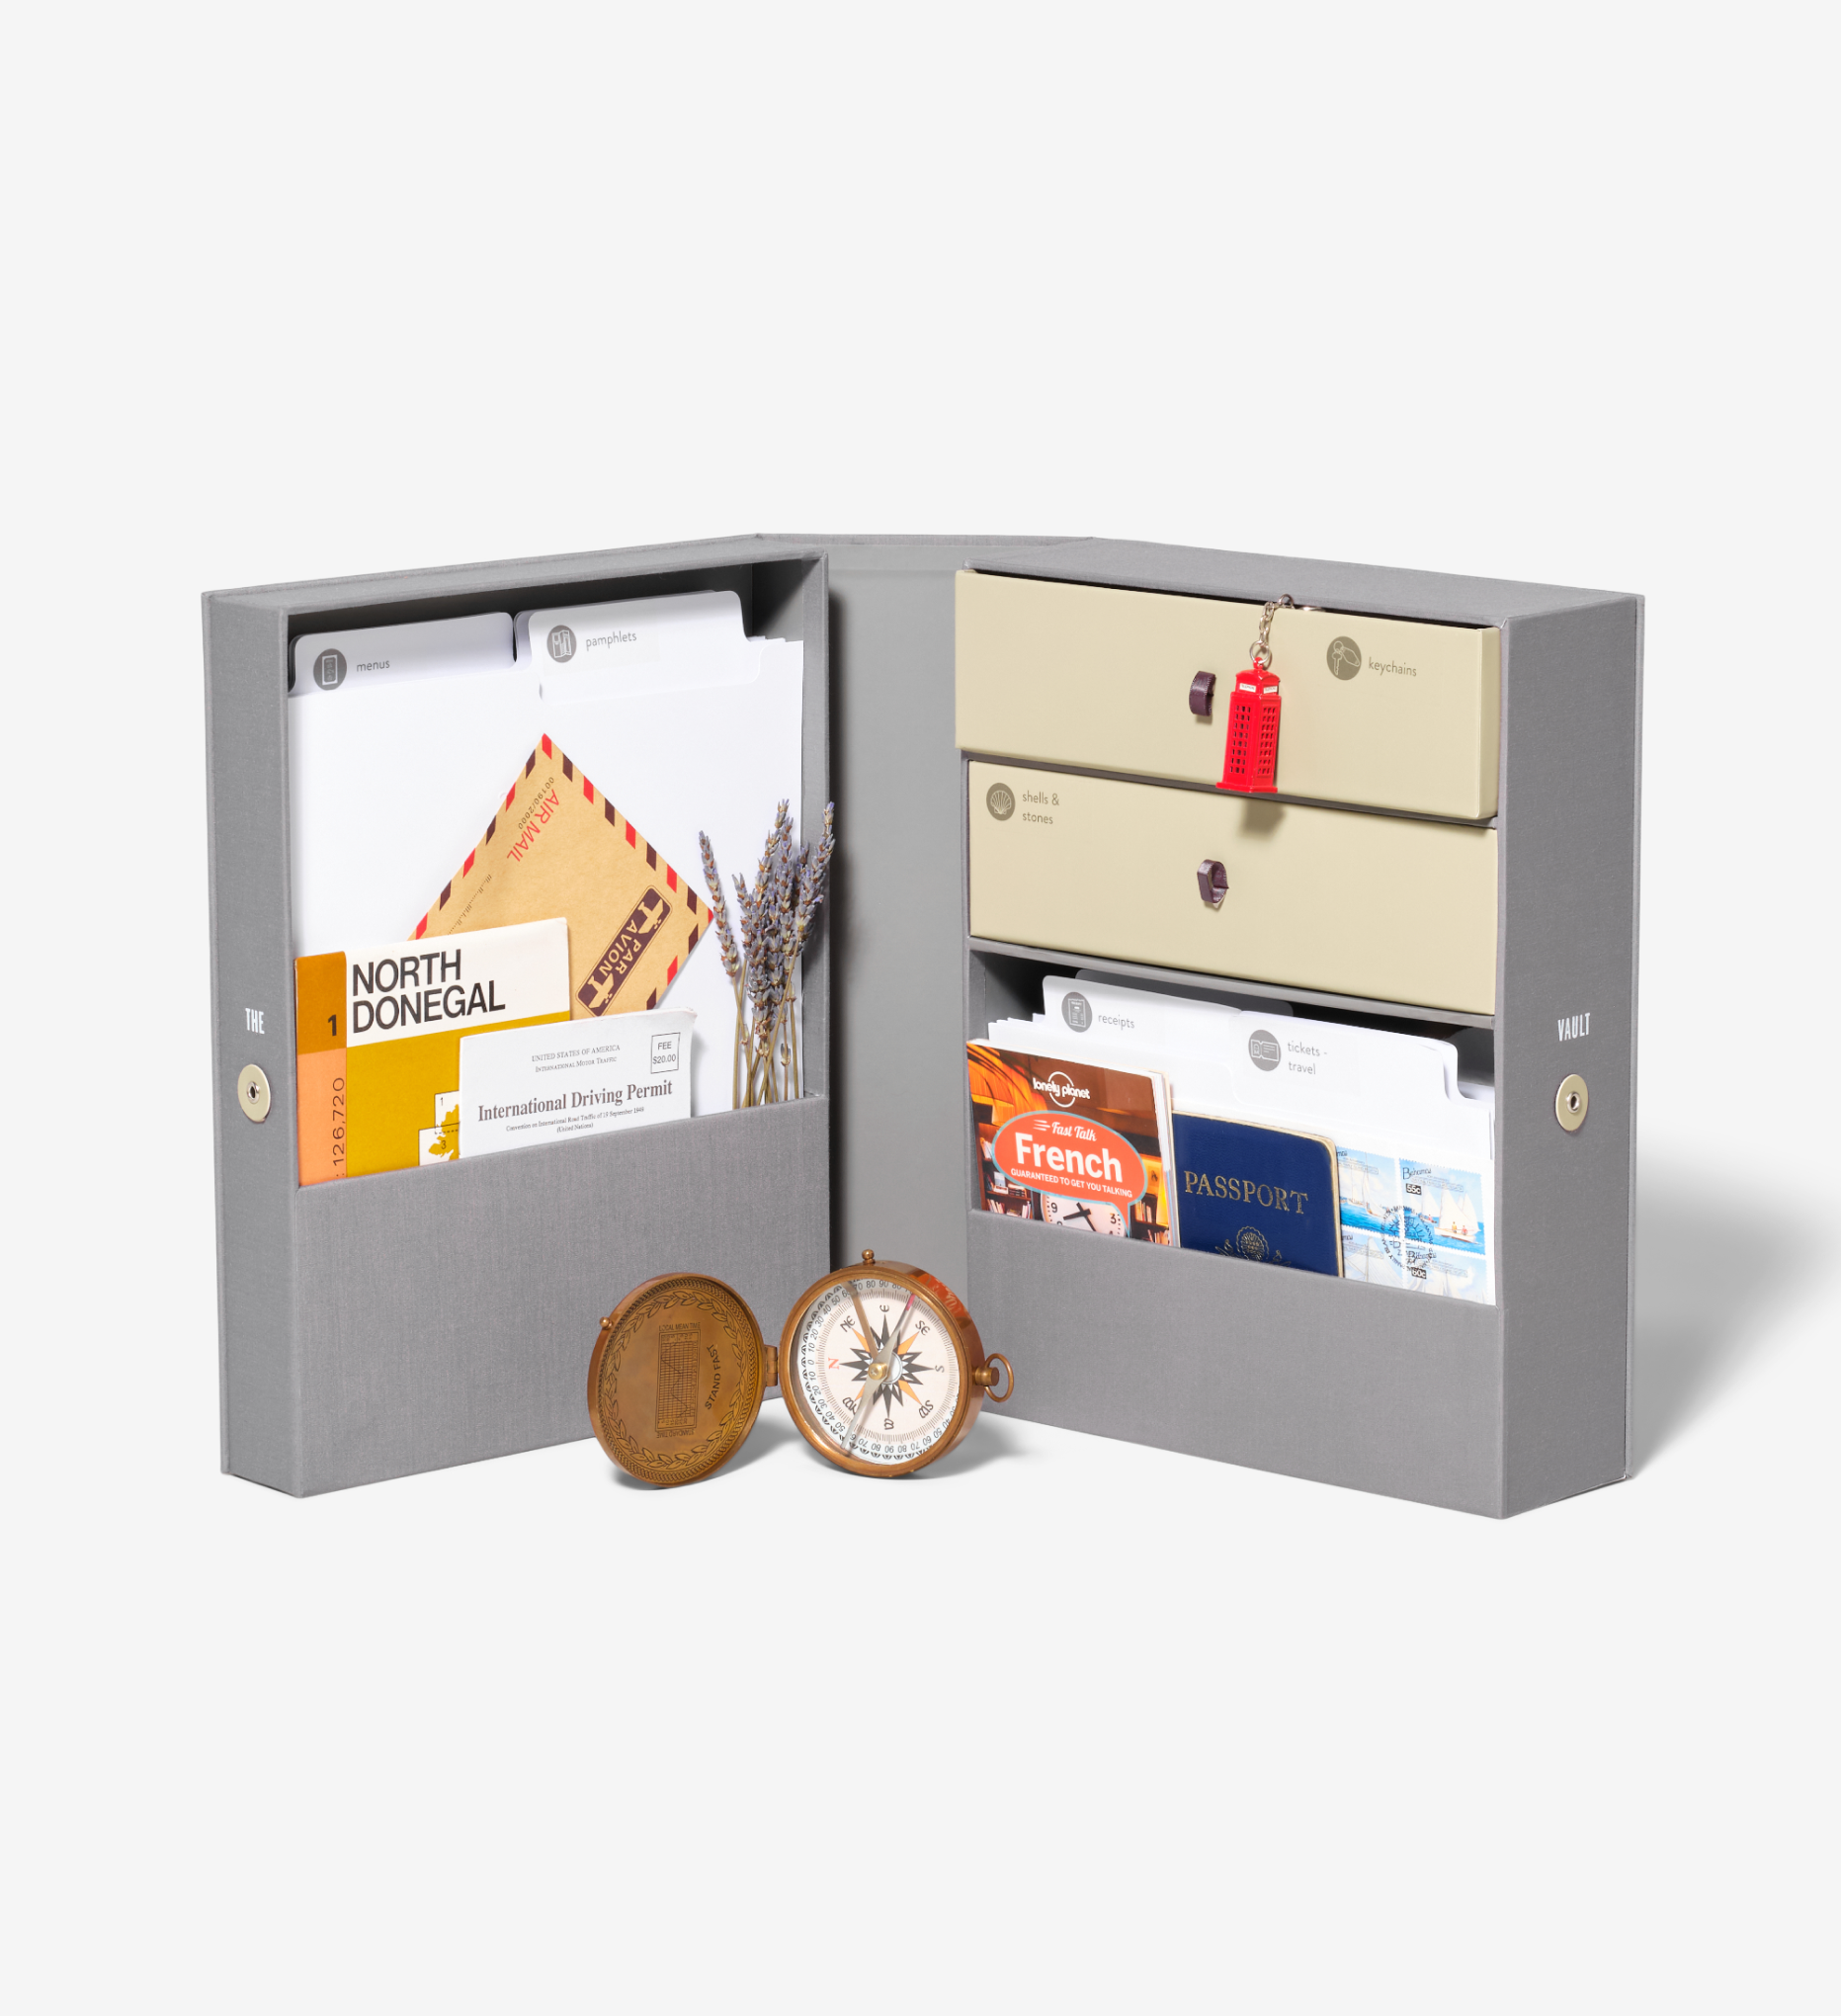 Adventure Archive Box,Travel Collection Box,Travel Box For Memories Gift US